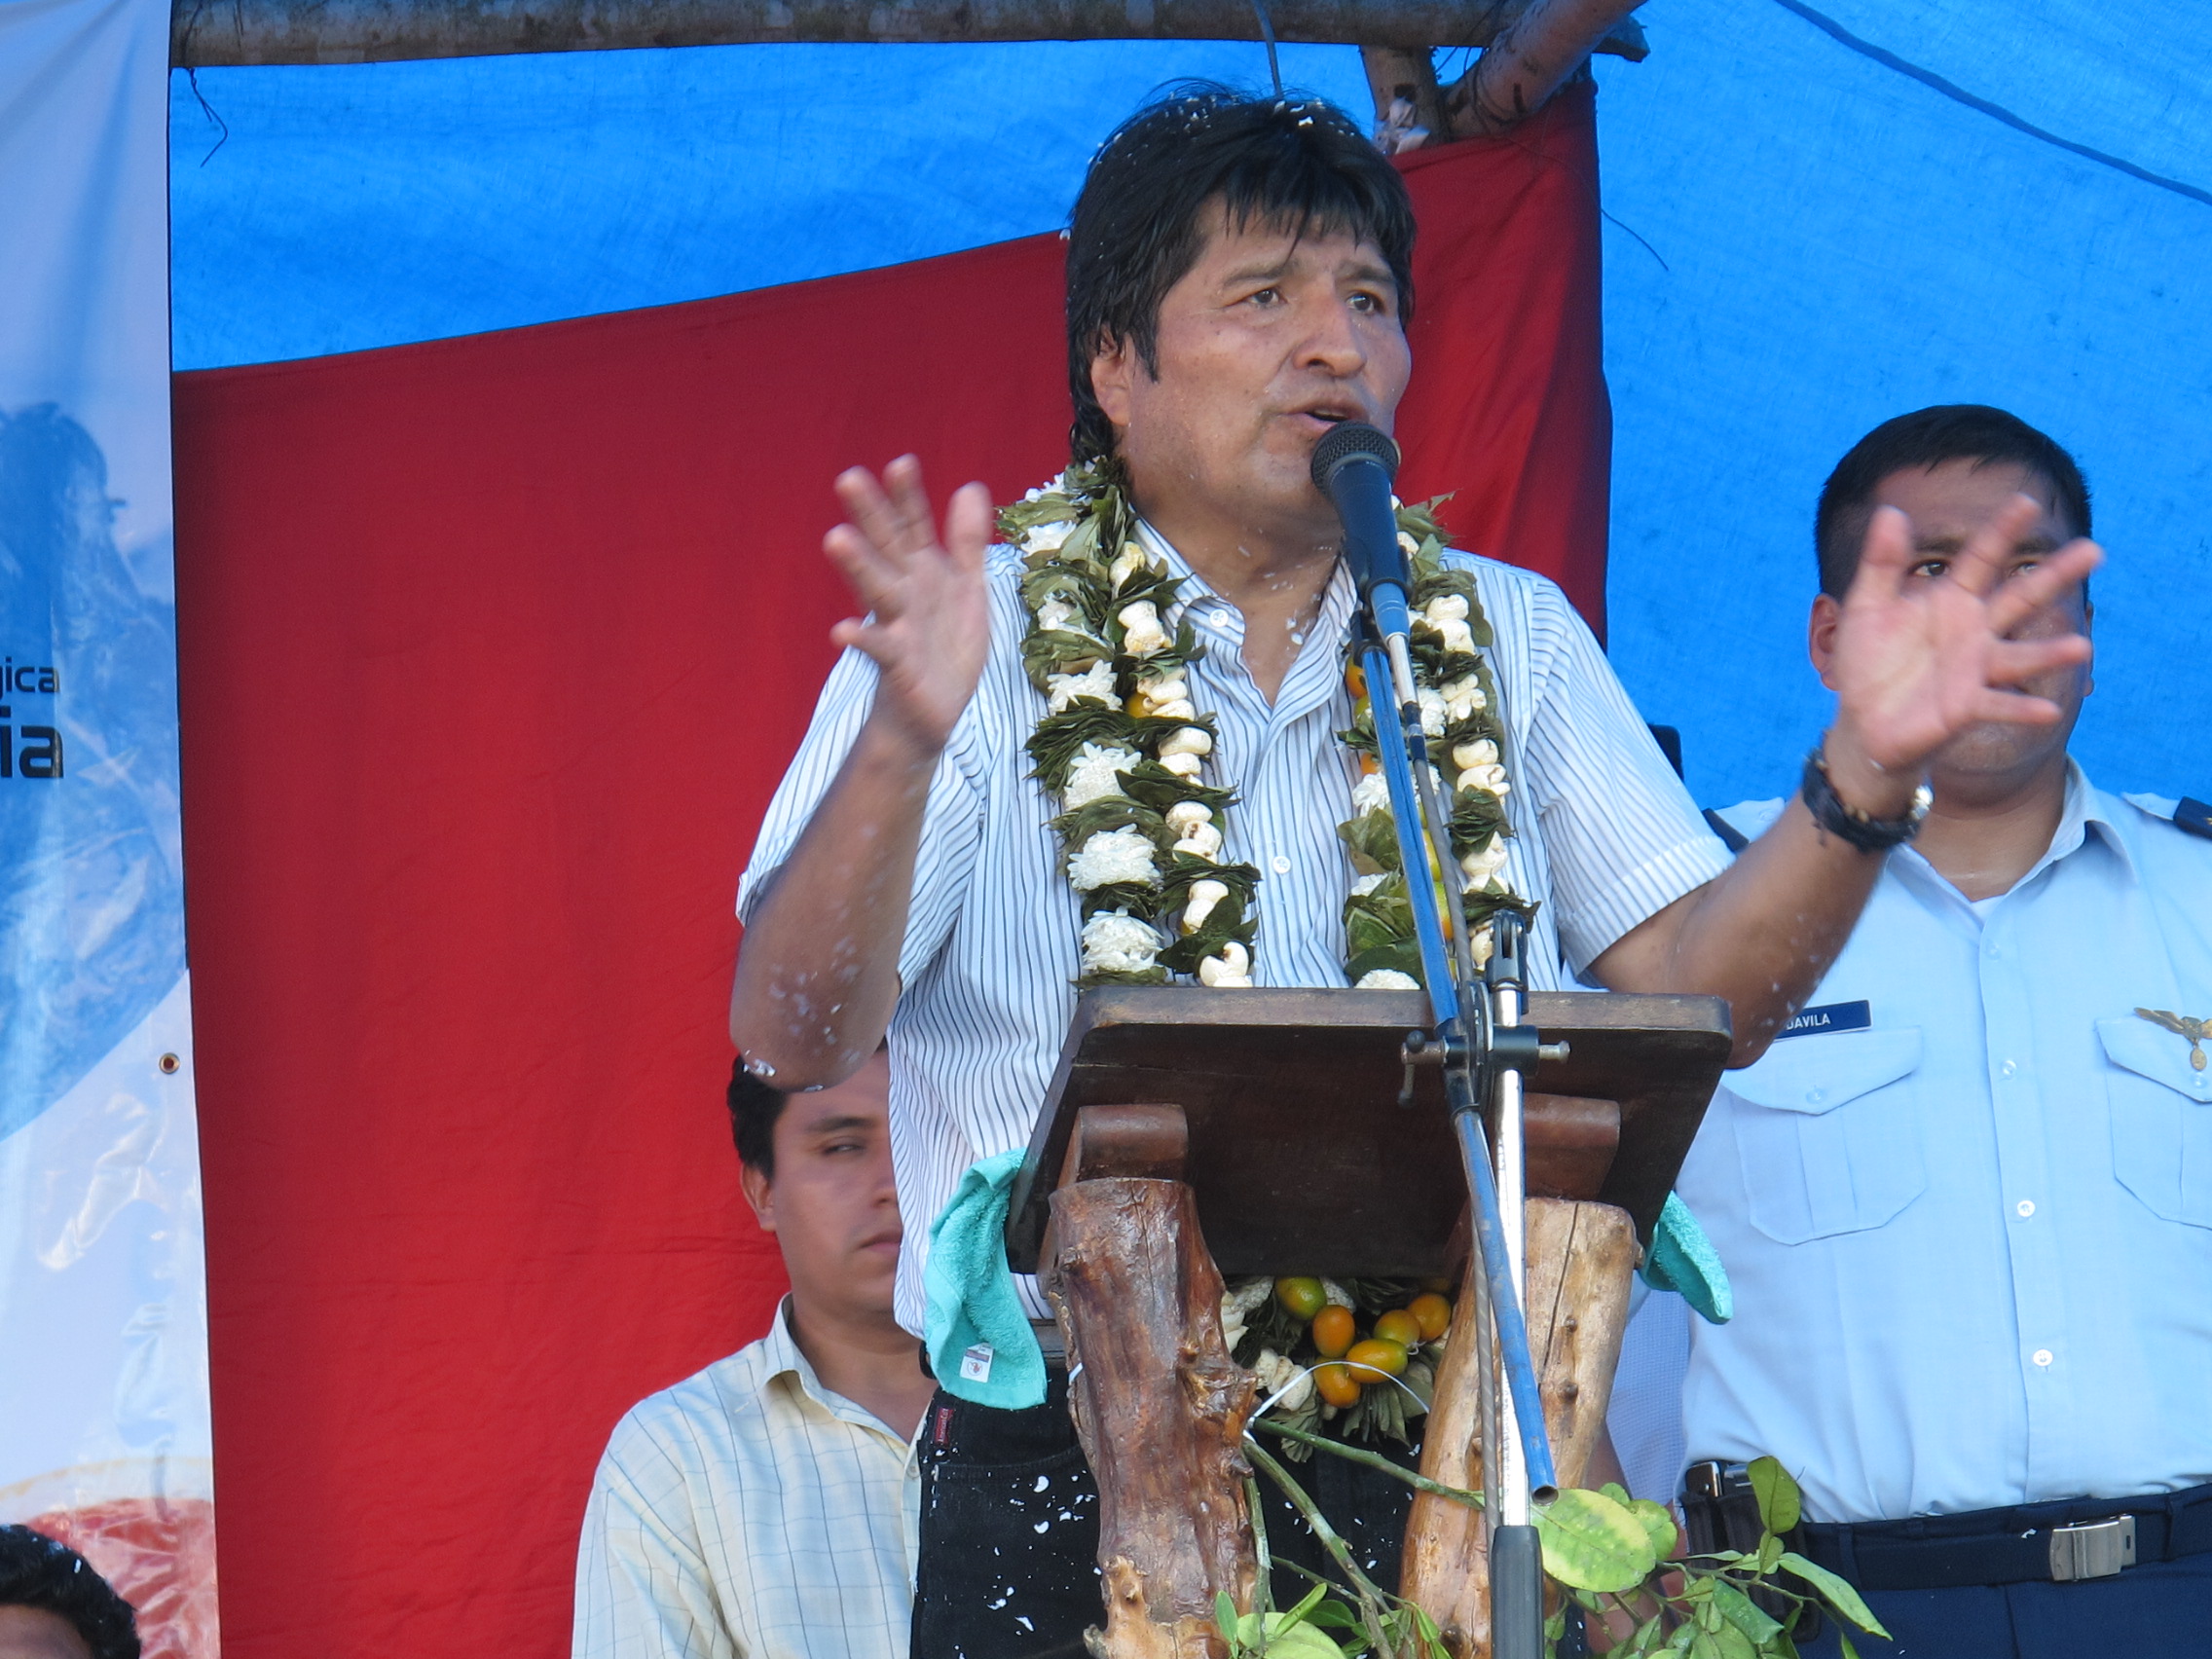 Evo Morales says Argentina’s military on the border seek to “intimidate” Bolivia